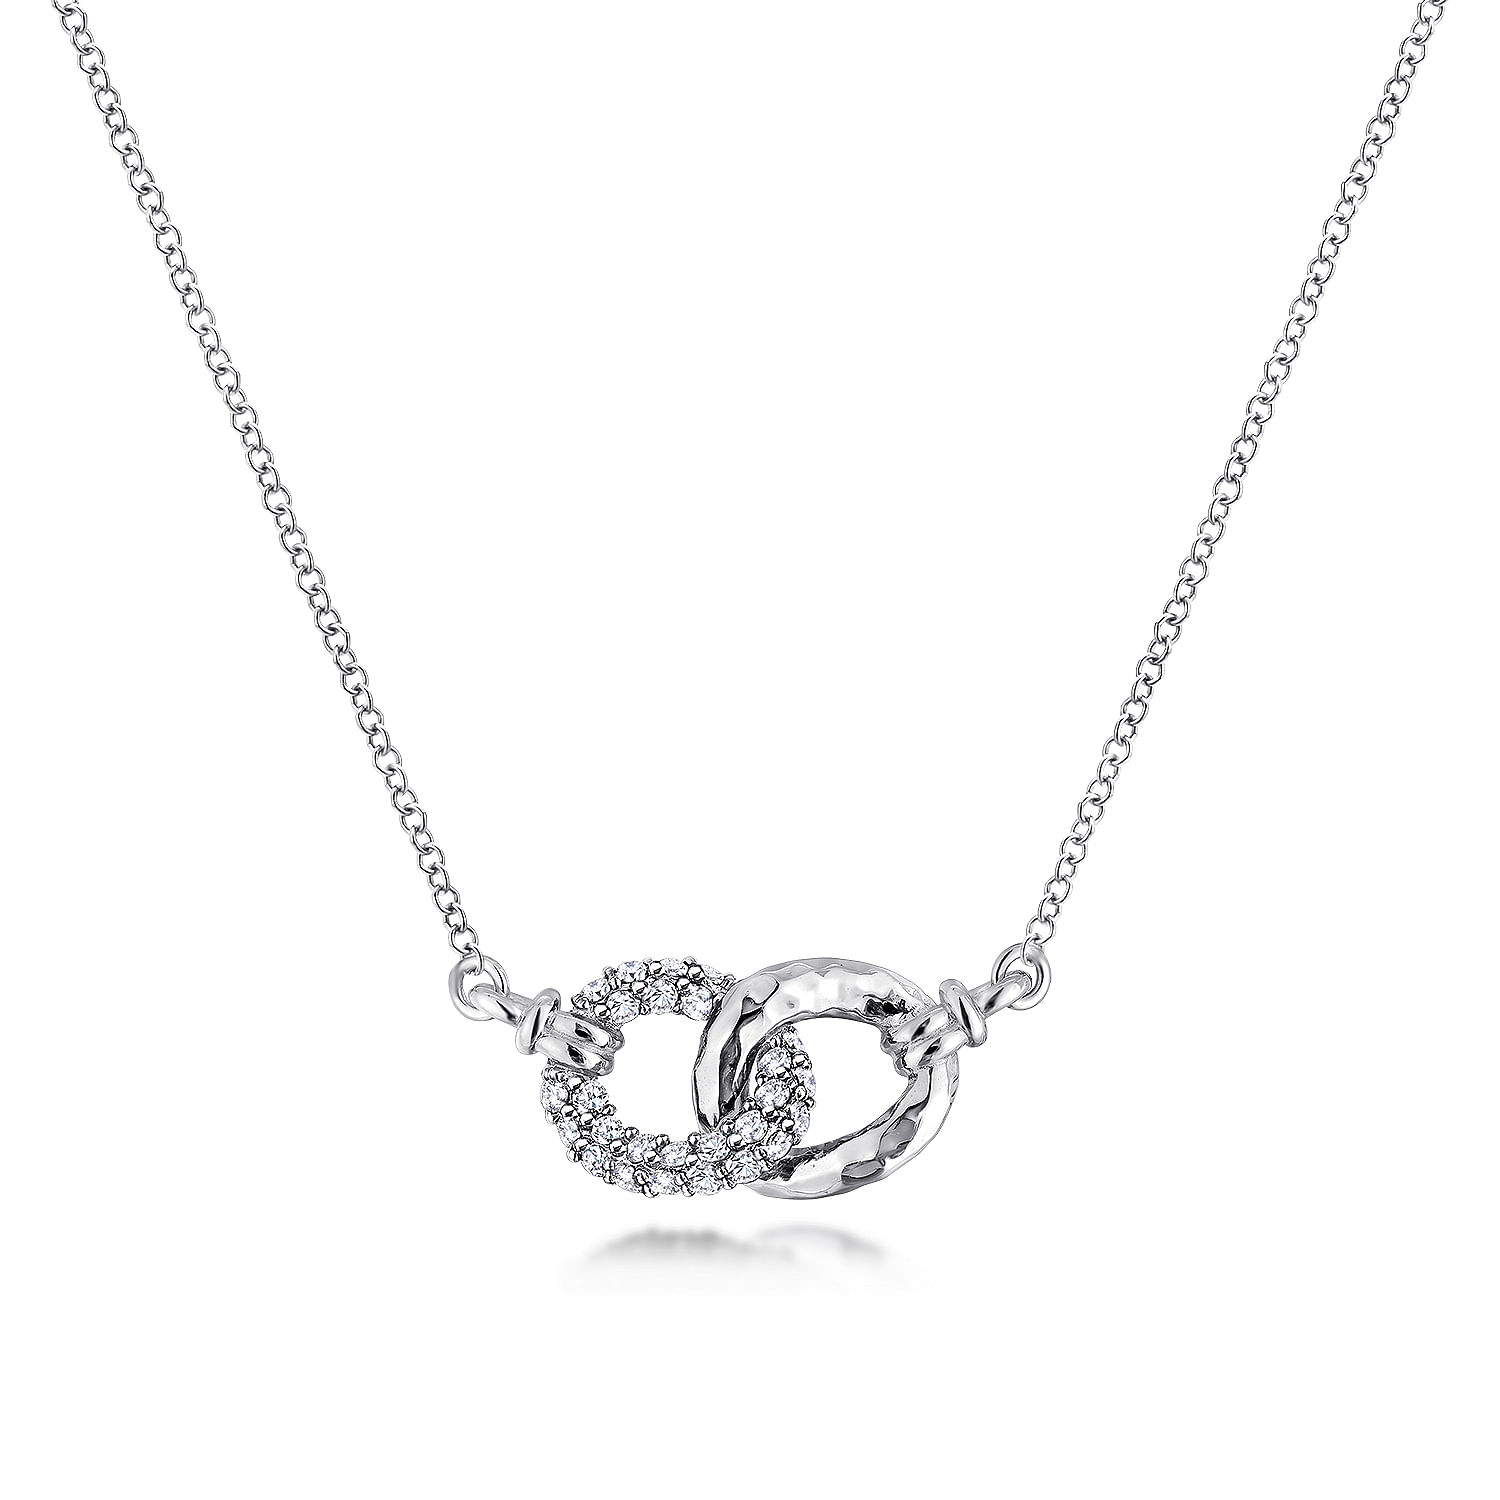 925 Sterling Silver and White Sapphire Interlocking Links Necklace